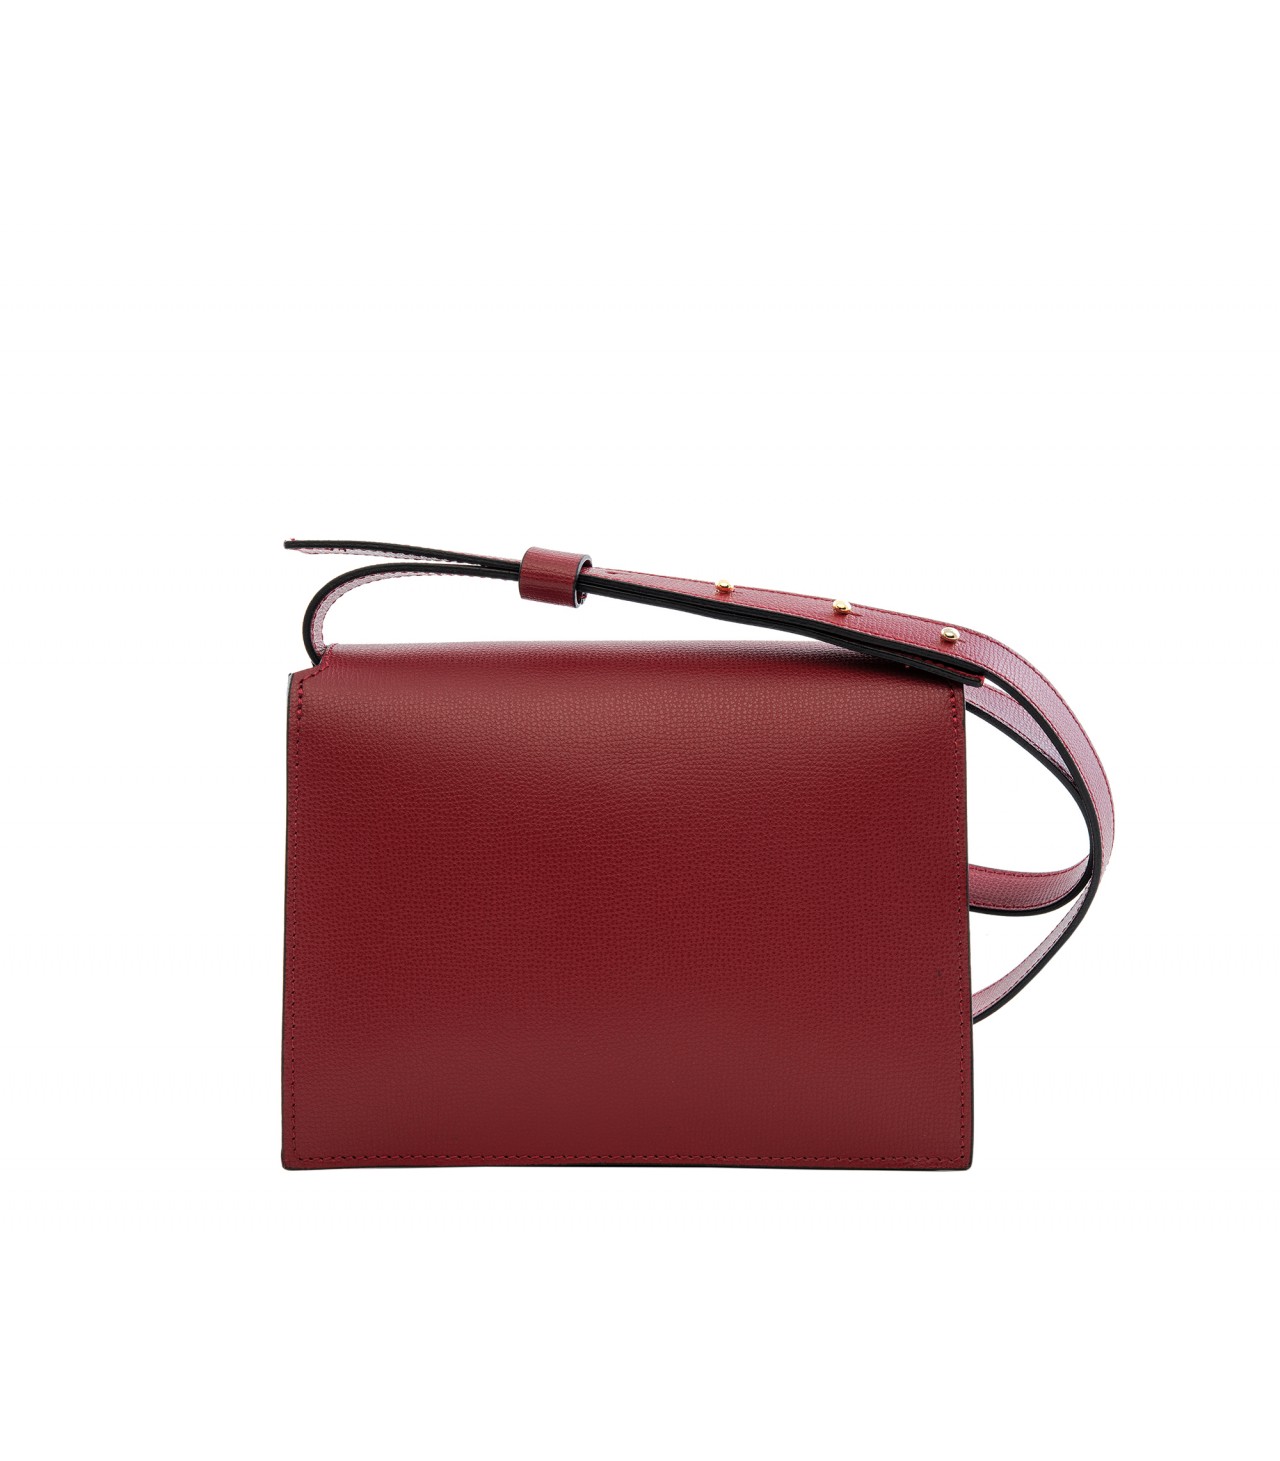 Grained leather shoulder bag - Camelia Roma